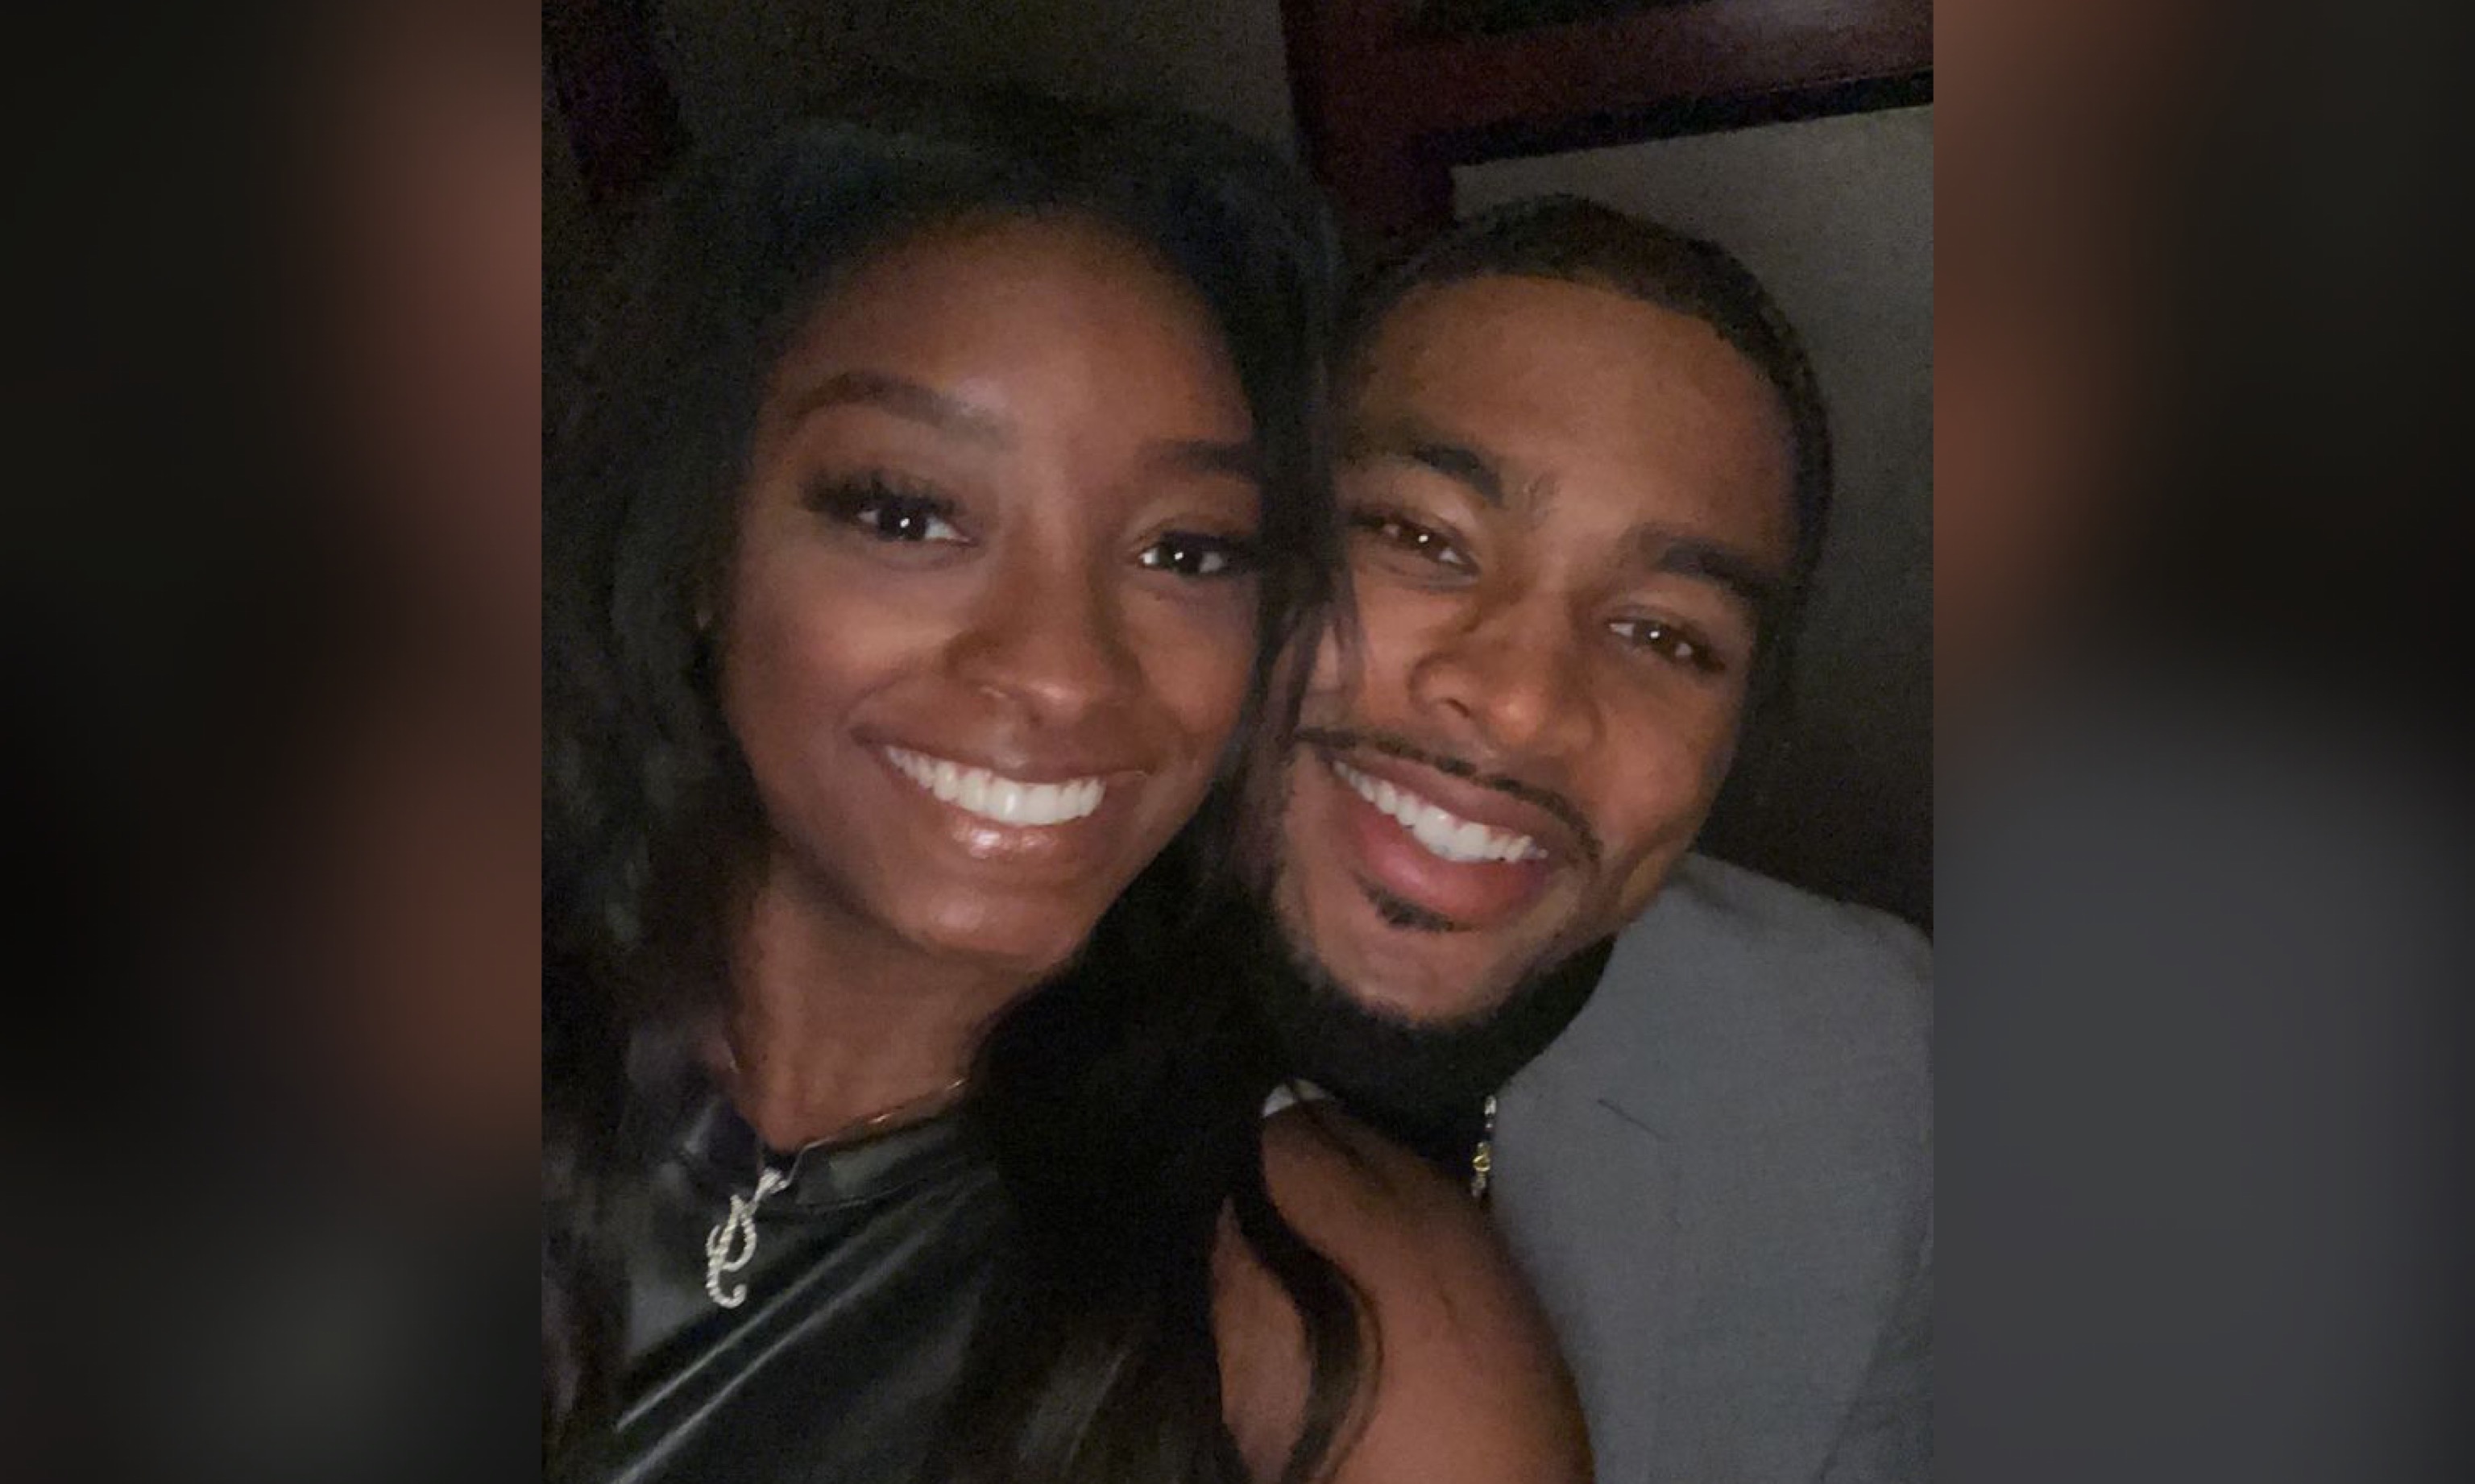 Simone Biles And Jonathan Owens Got Engaged On Valentine's Day - UAE Times